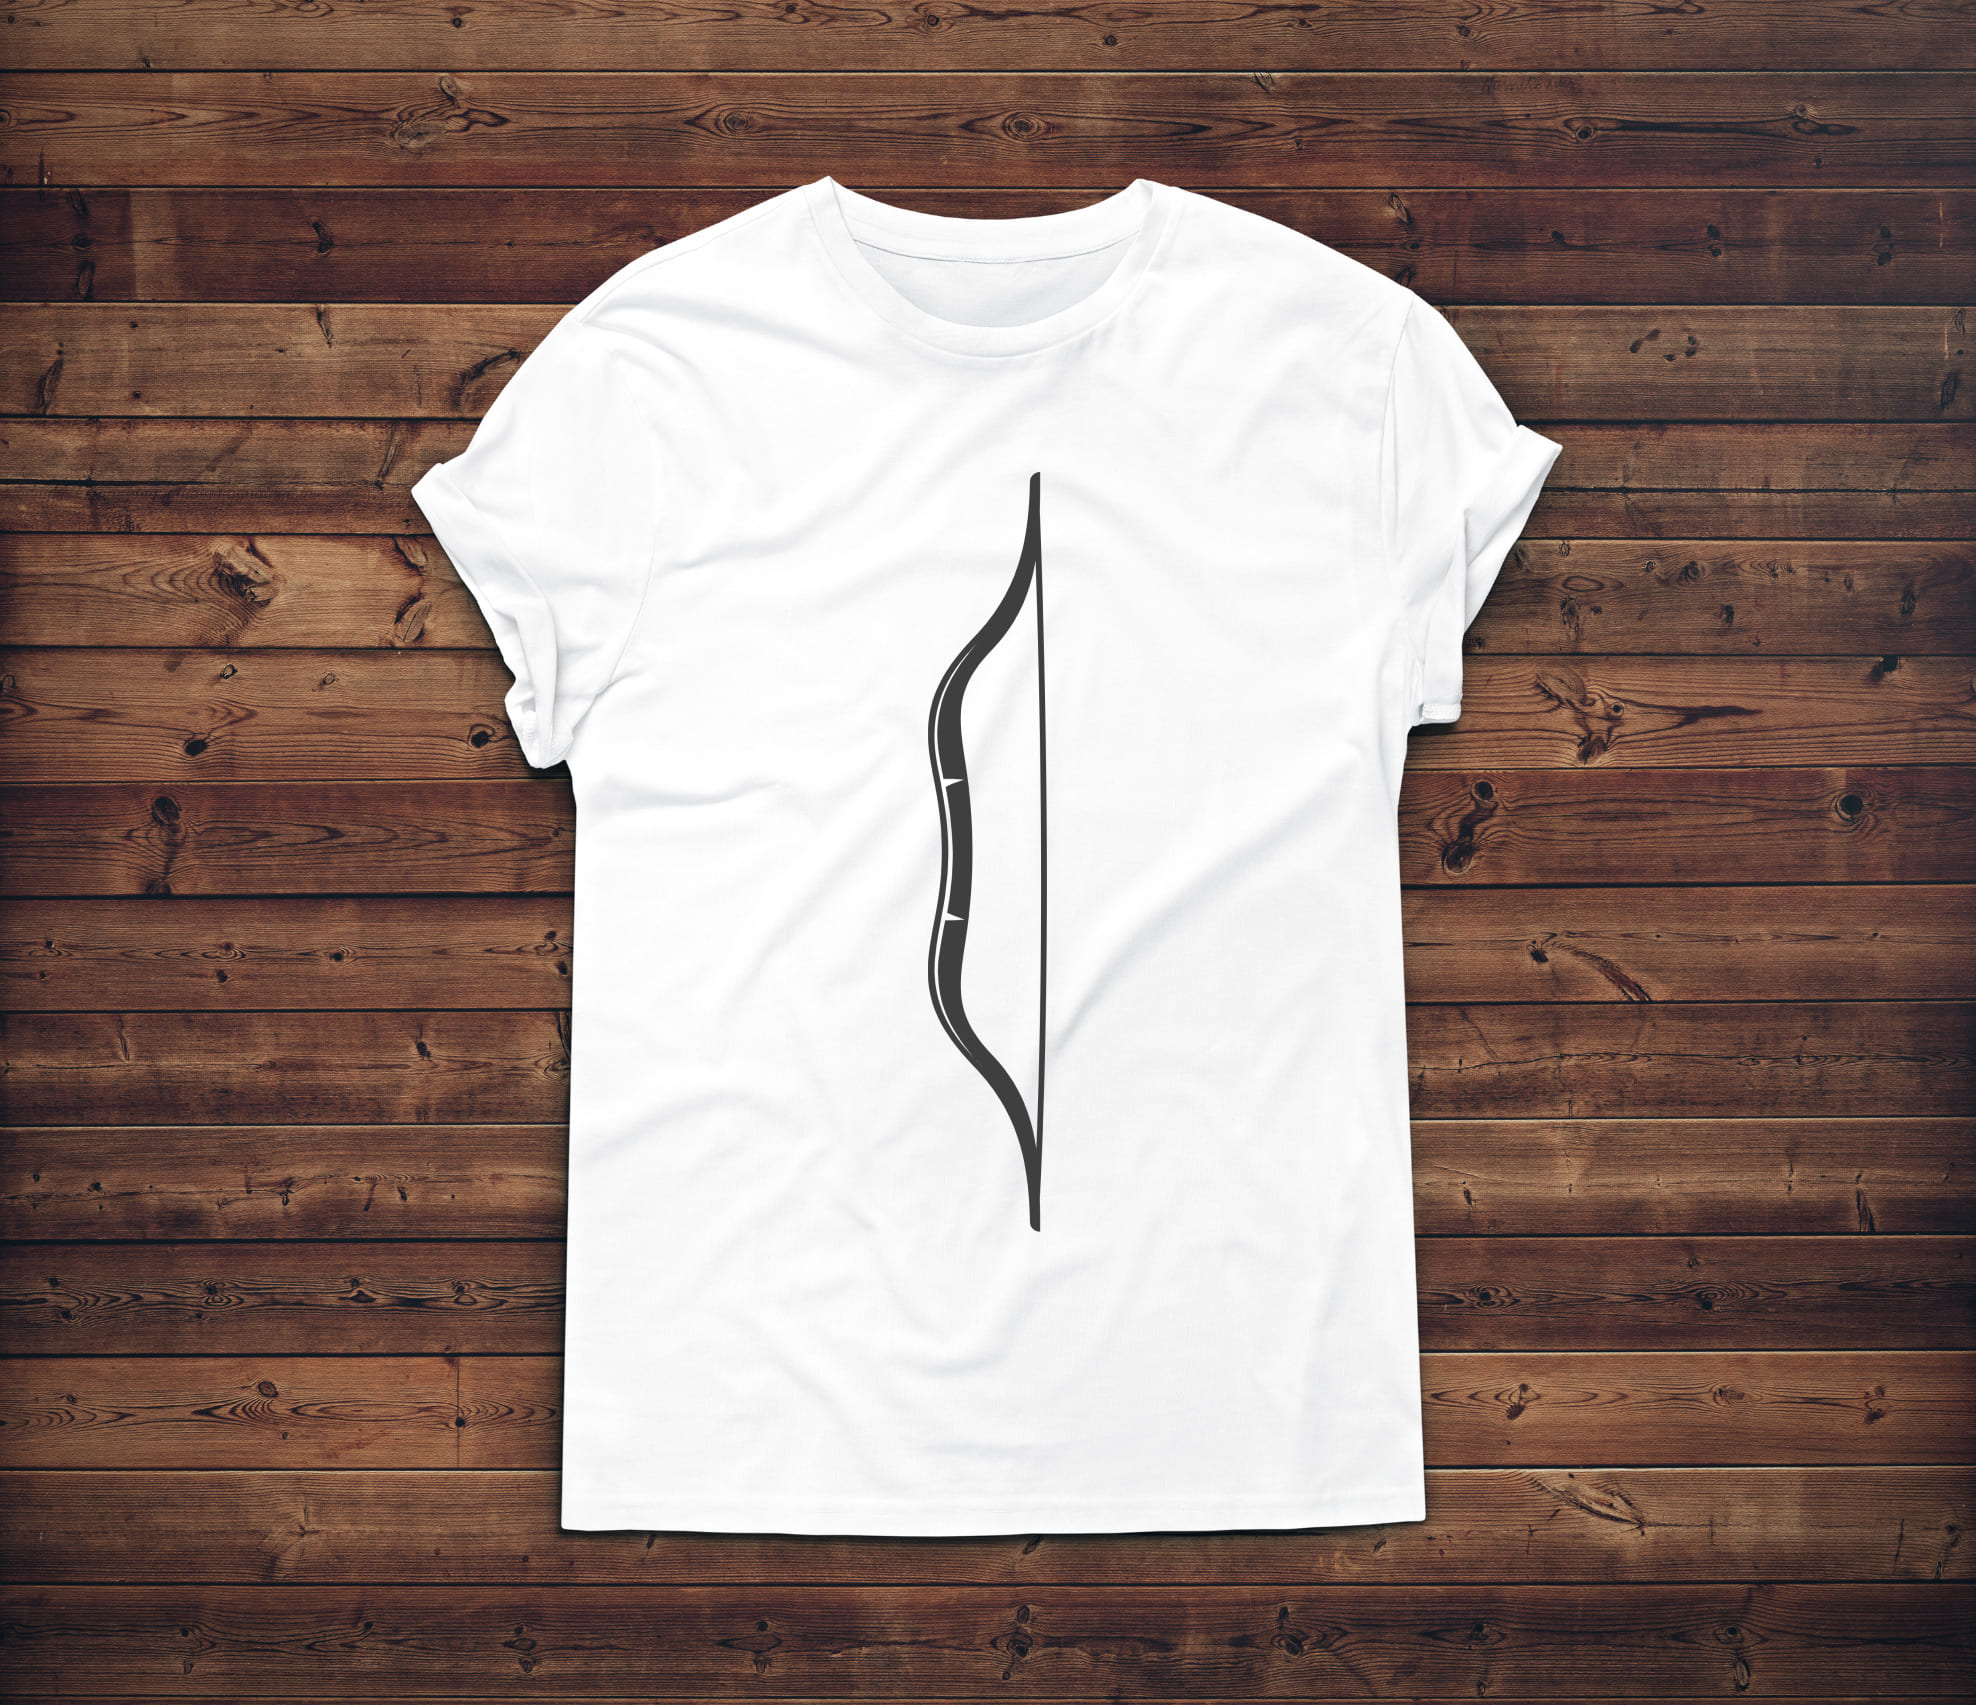 Image of a white t-shirt with an enchanting bow silhouette print.